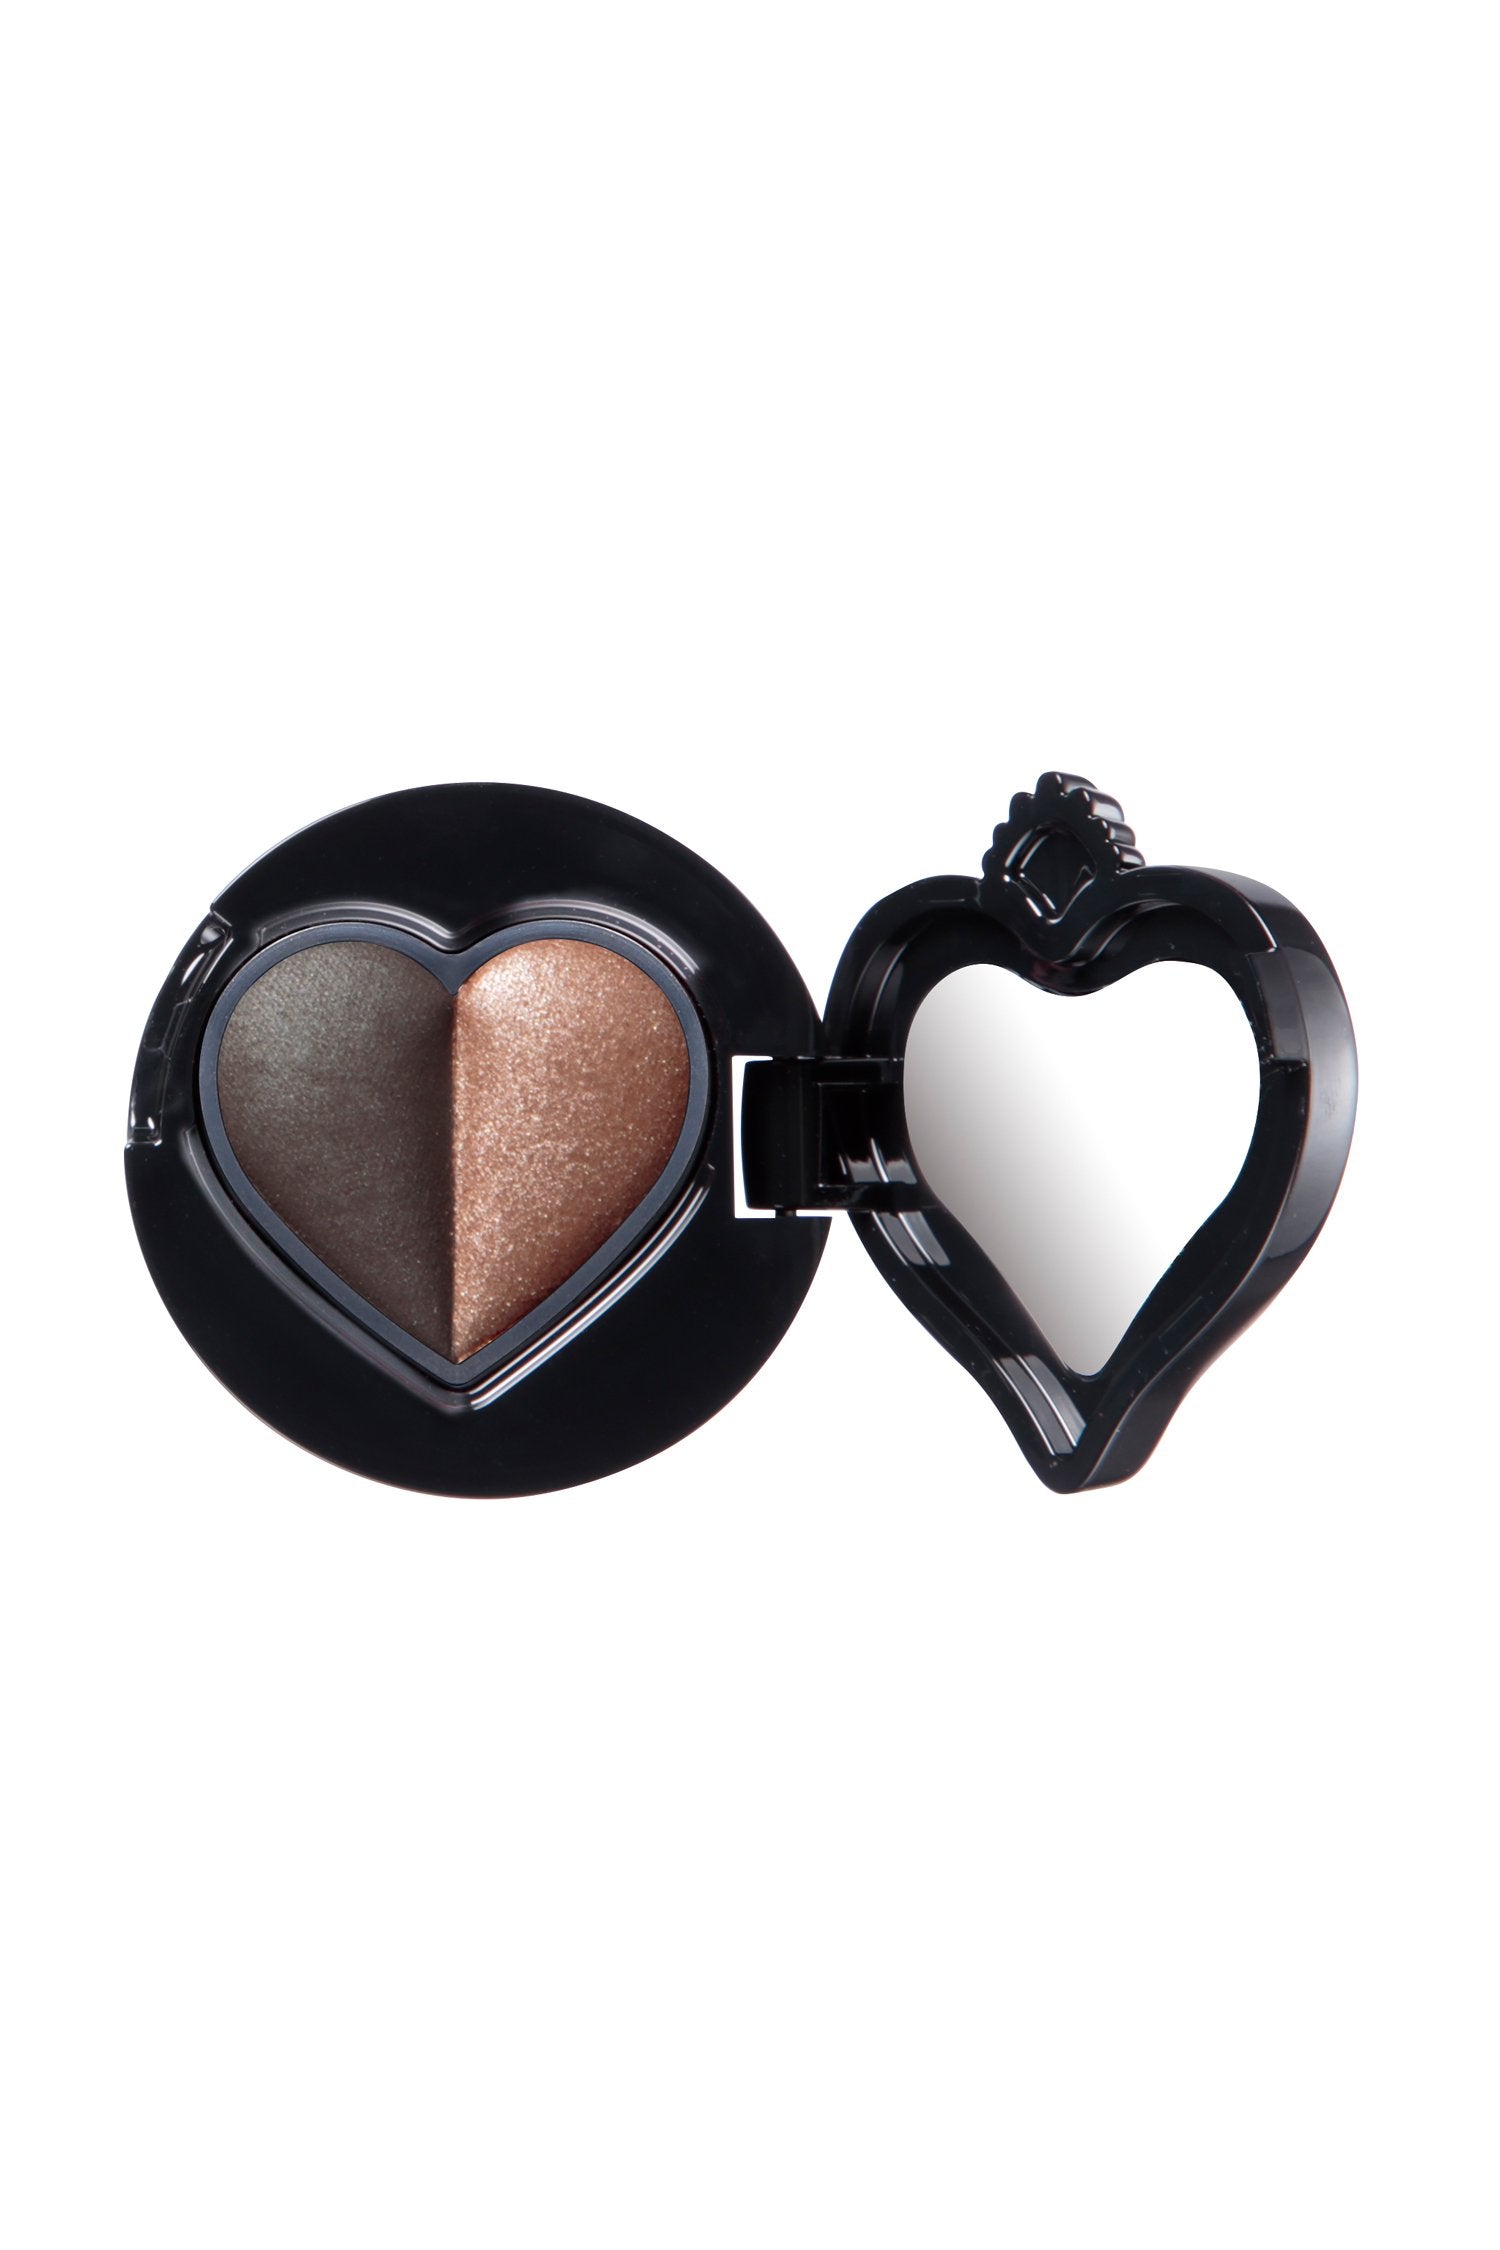 Sui black eye color RICH BROWN DUO Round Black container with a heart shaped lid with a mirror inside 